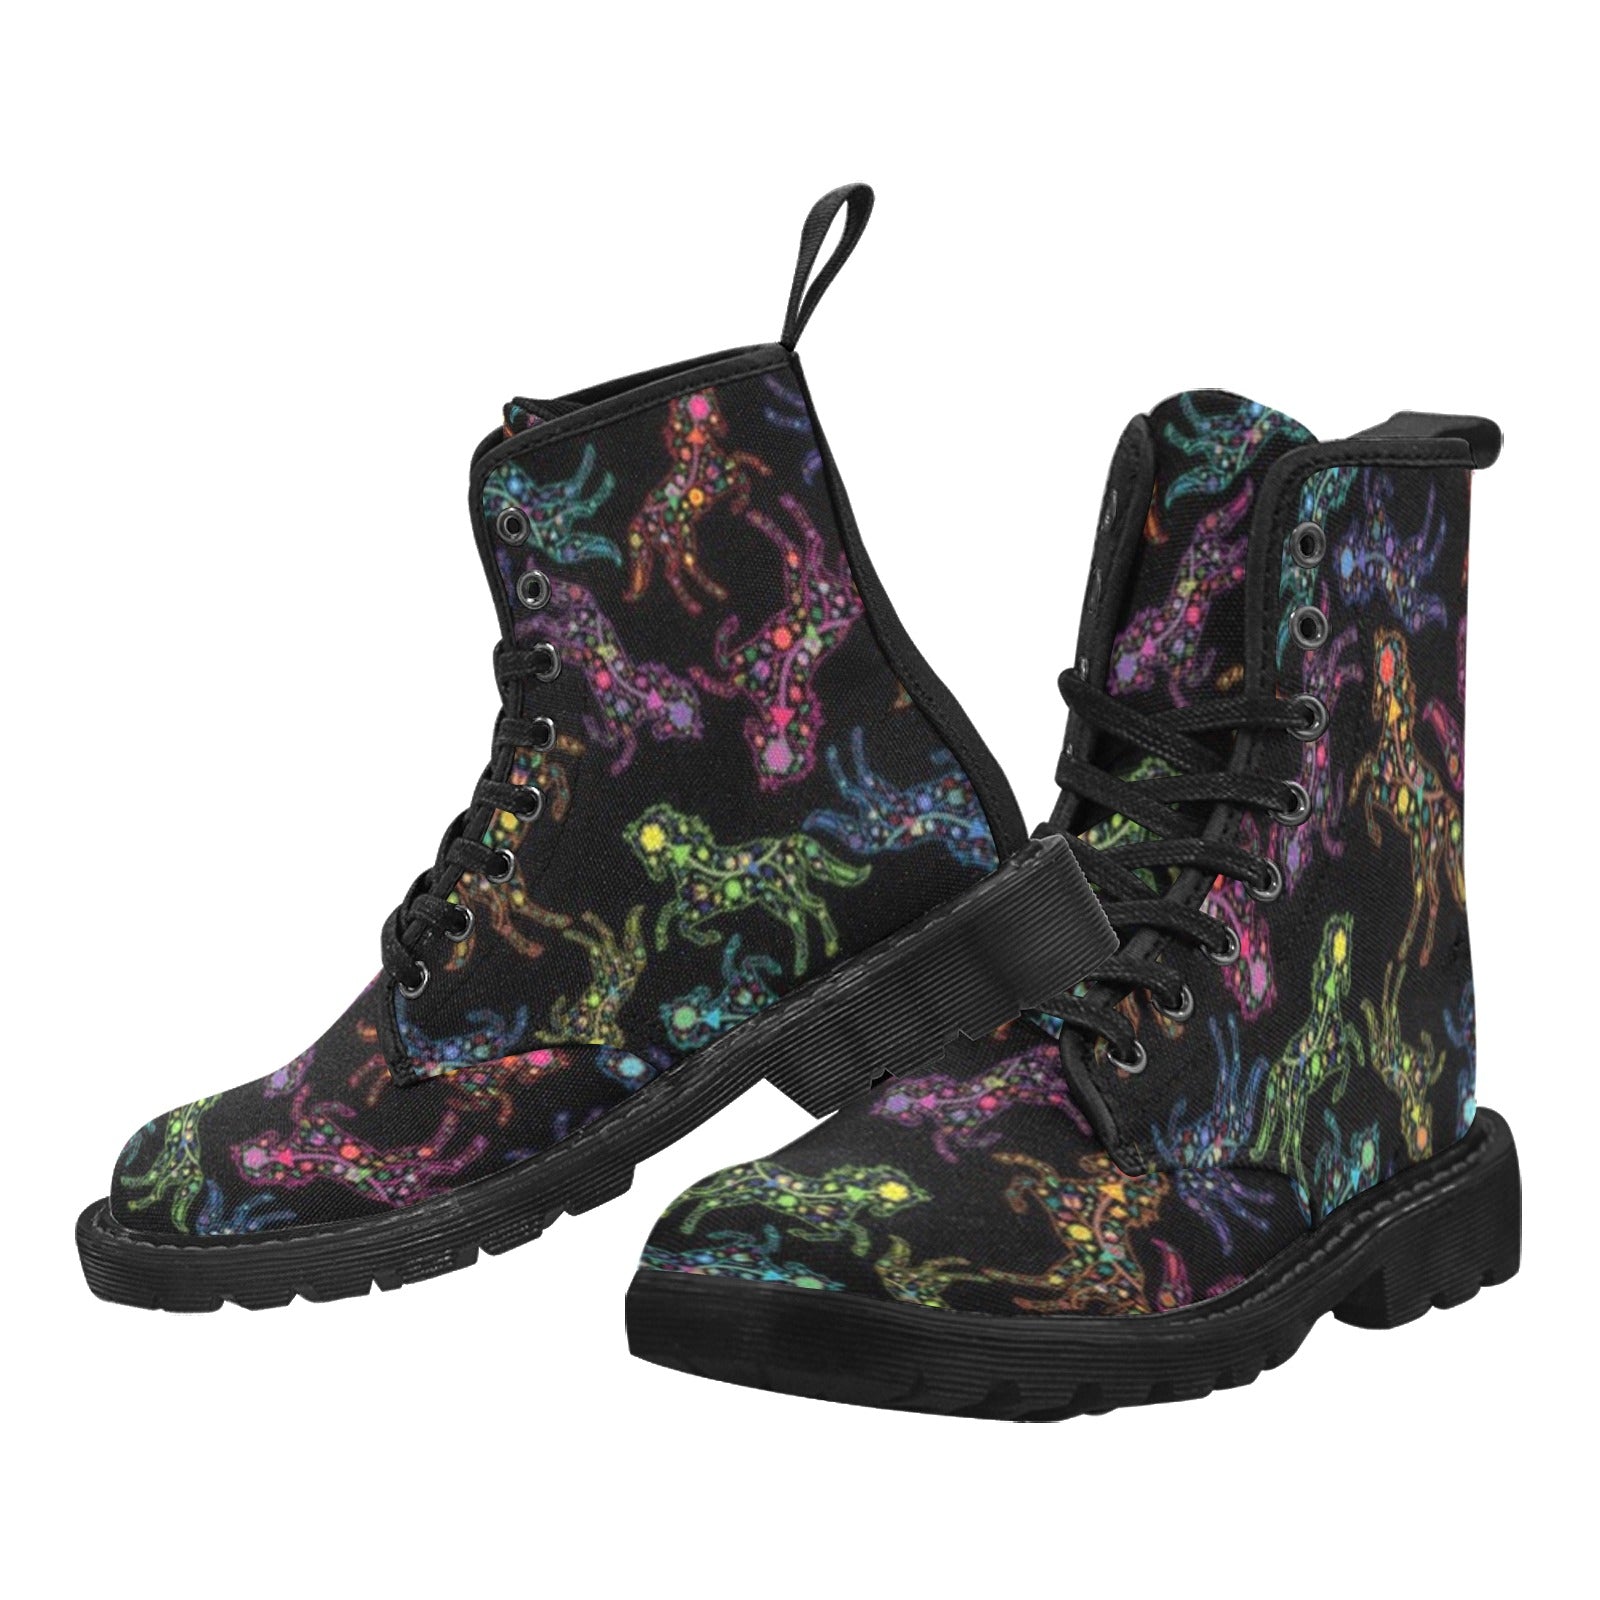 Neon Floral Horses Boots for Women (Black)